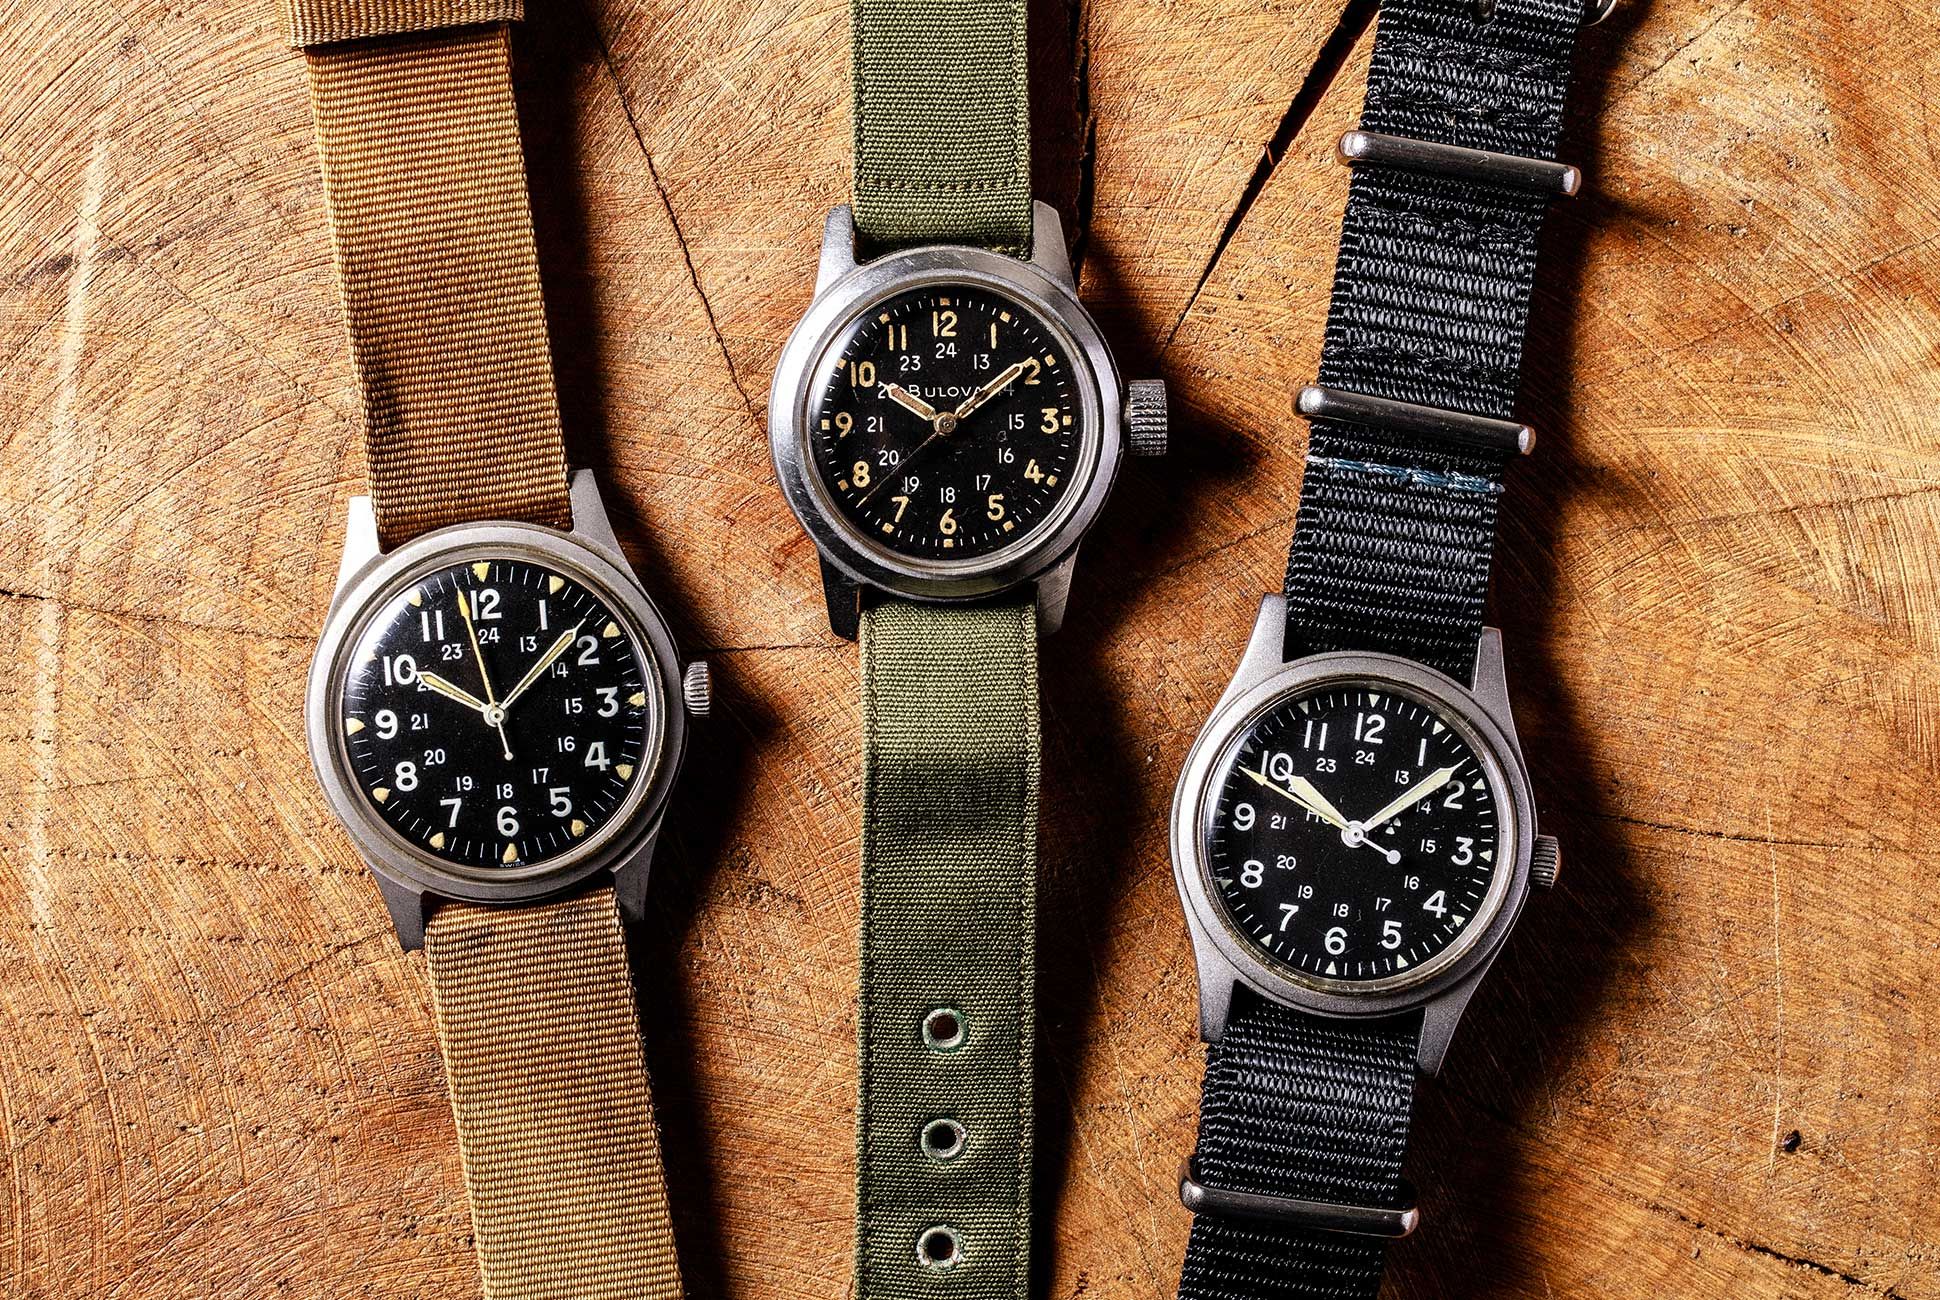 21 Of The Best Military Watches And Their Histories | lupon.gov.ph